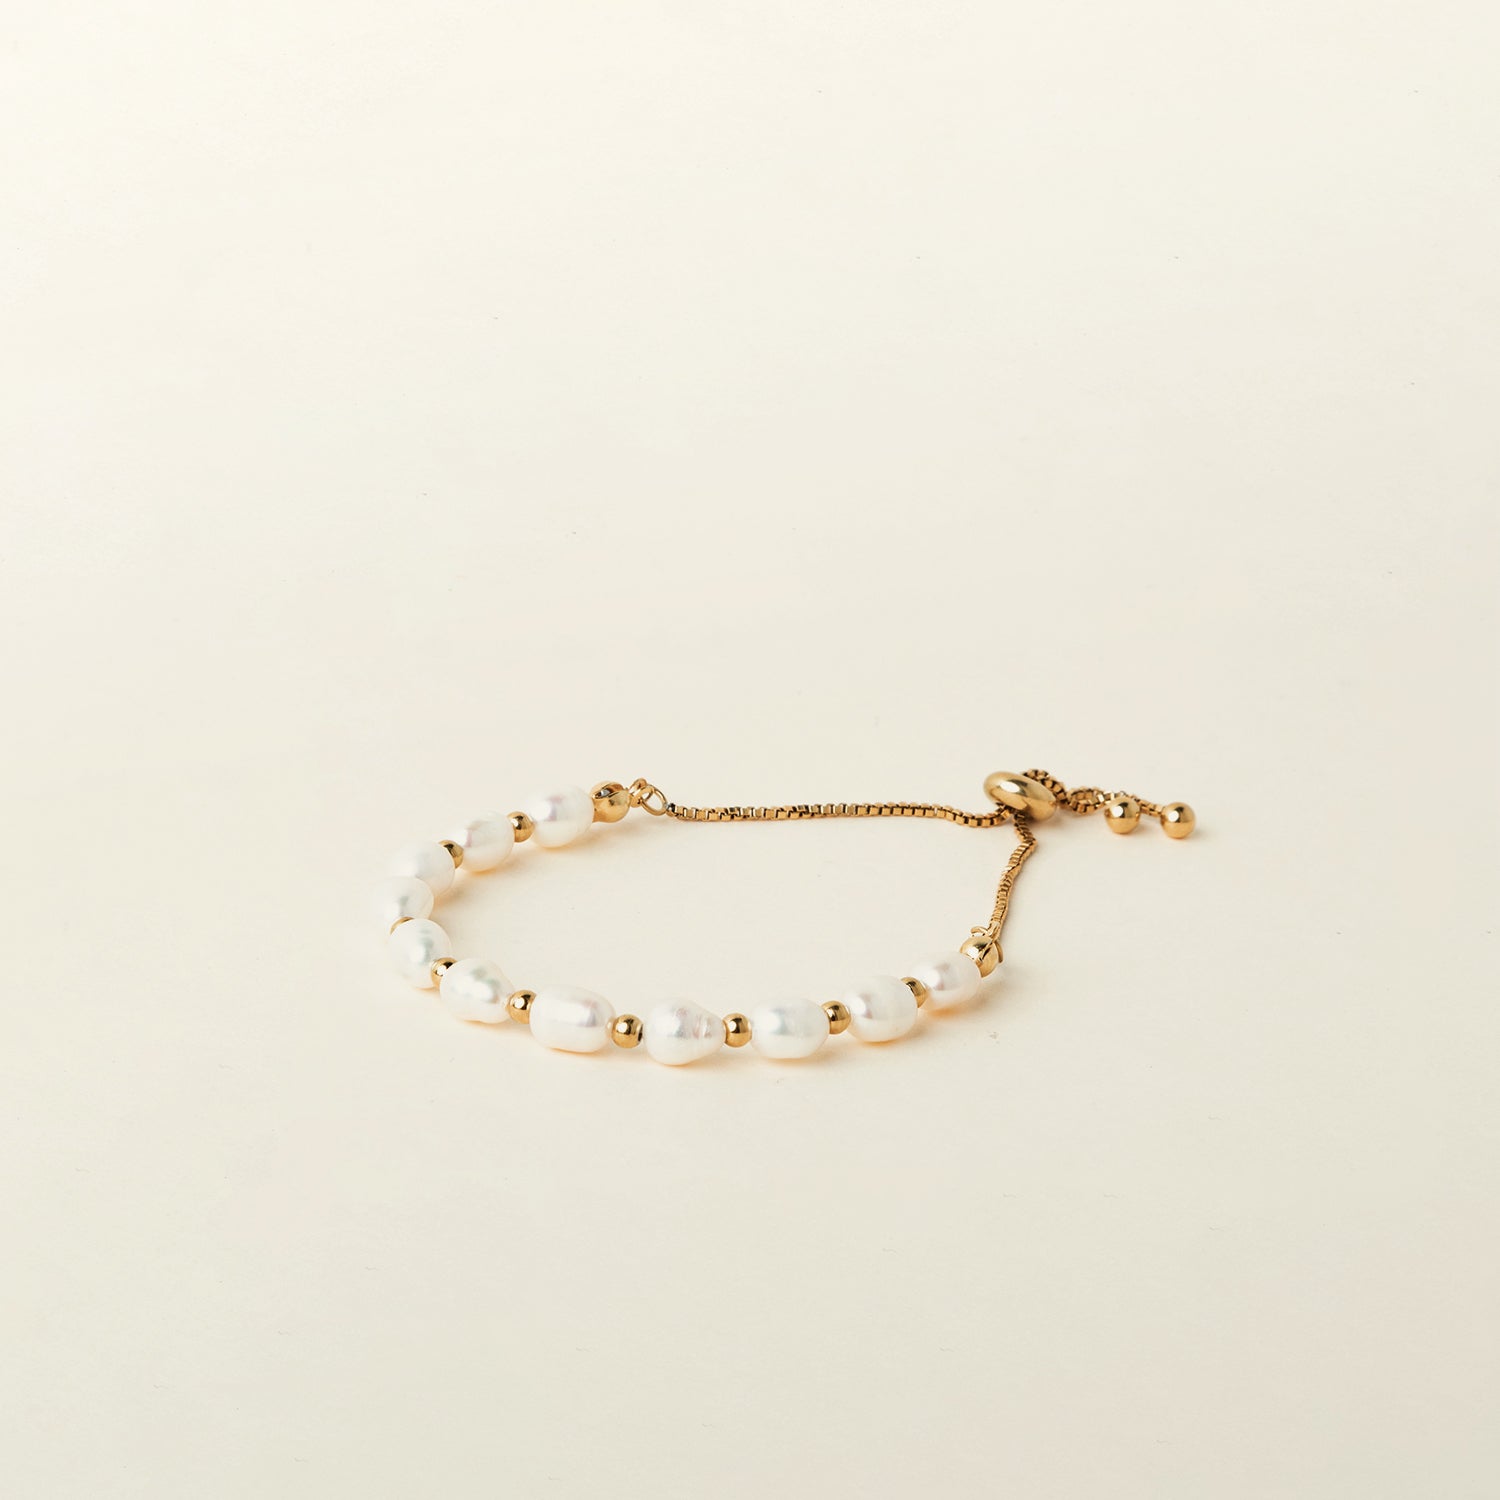 Image of the Emi Pearl Bracelet is crafted from 18K Gold Plated Stainless Steel and Freshwater Pearls, allowing for a small degree of variation in size and hue. The bracelet is water-resistant and hypoallergenic.